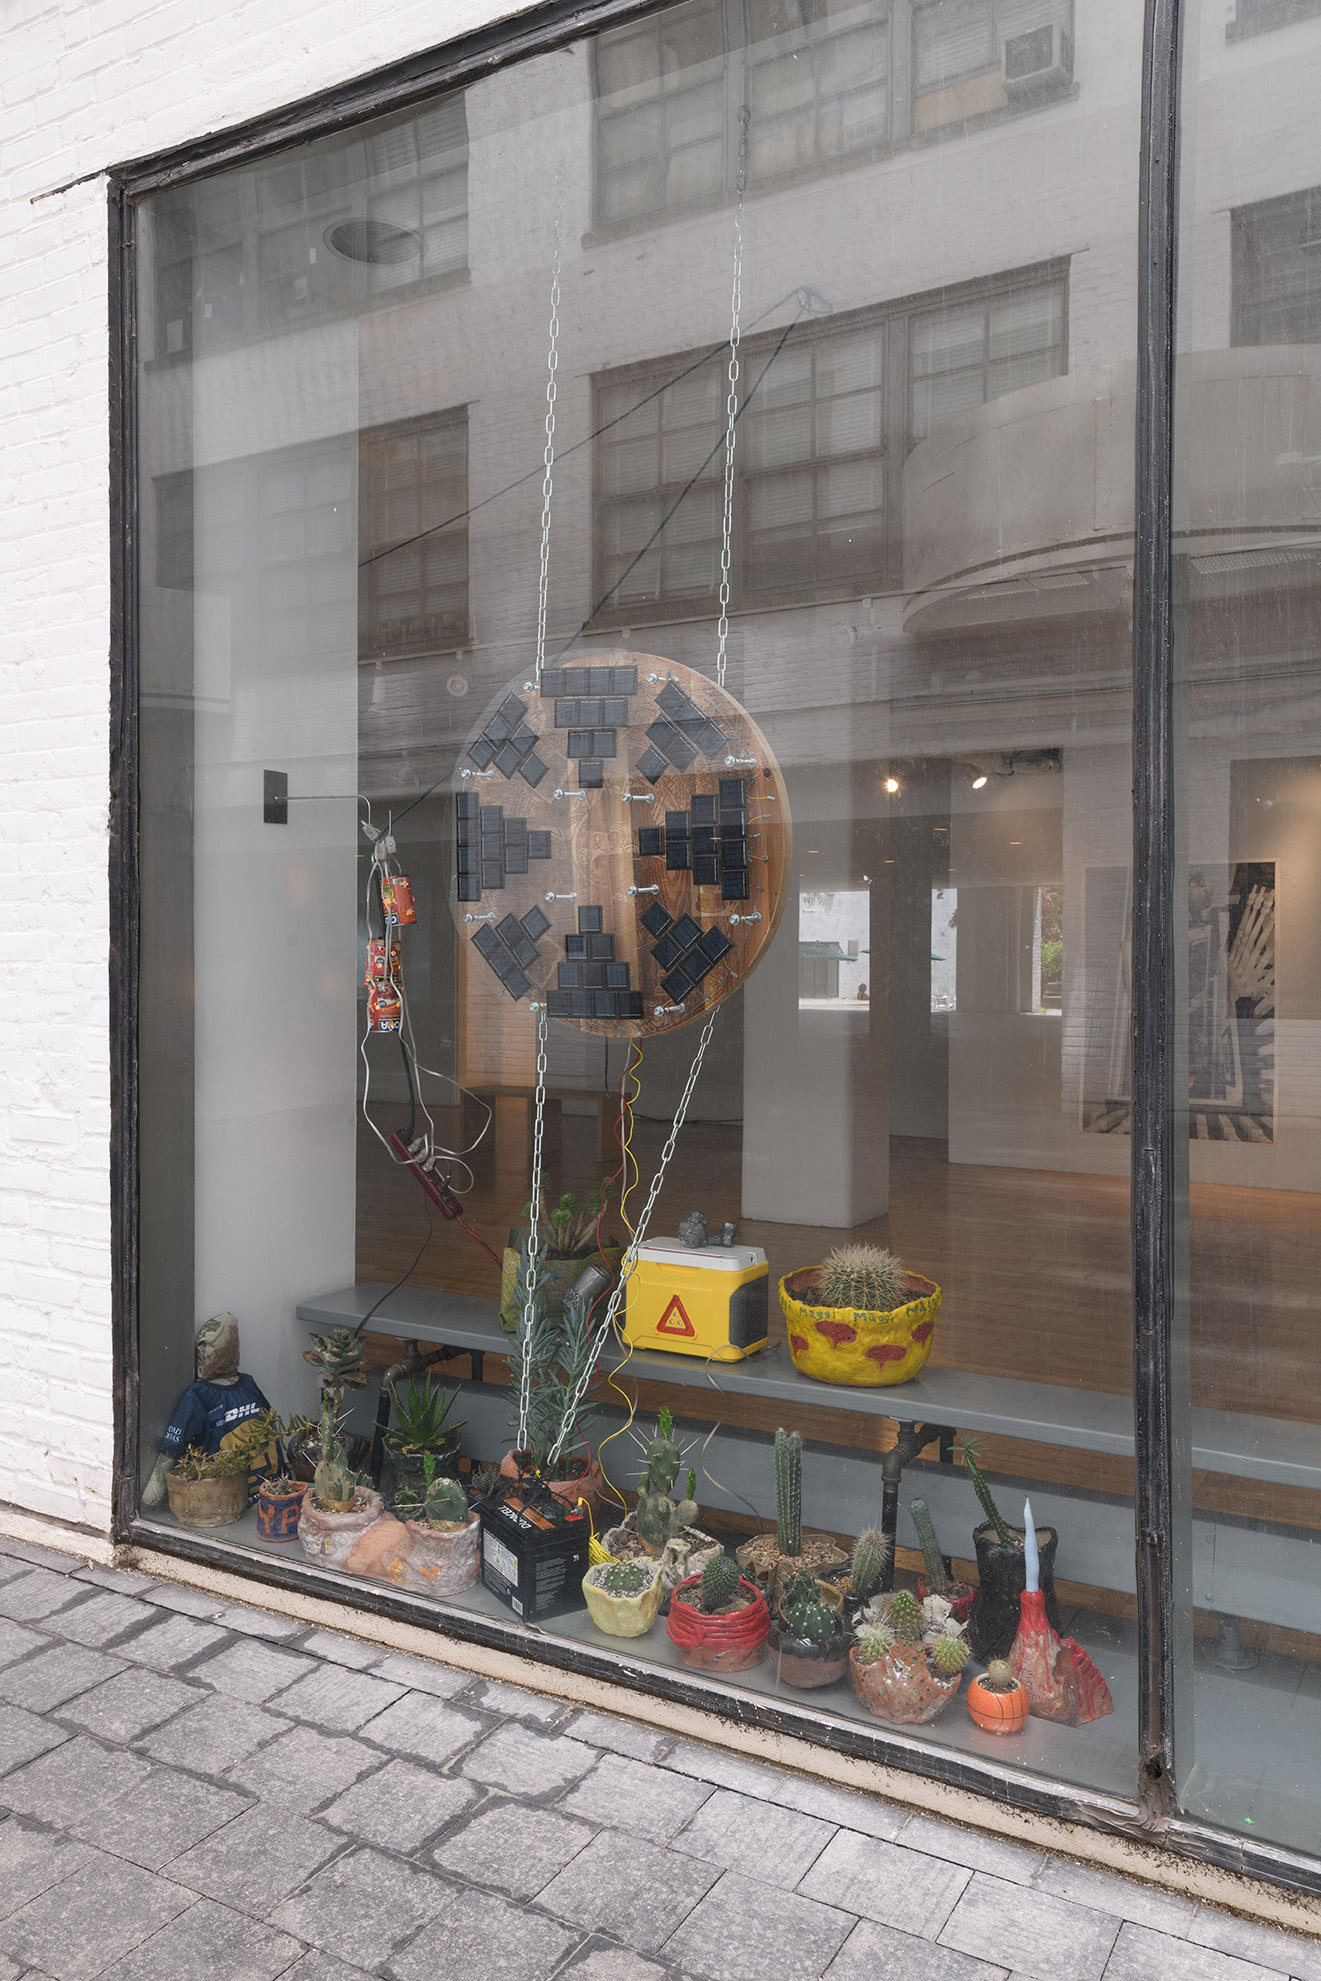 [Exterior view of floor-to-ceiling gallery windows from courtyard. Through the window you can see a sculptural installation. On the floor there are around twenty colorful, handmade ceramic planters with various types of cacti. Hanging from two parallel silver chains above them is a flat, circular piece of wood with triangular configurations of small solar panels on the face of it.]